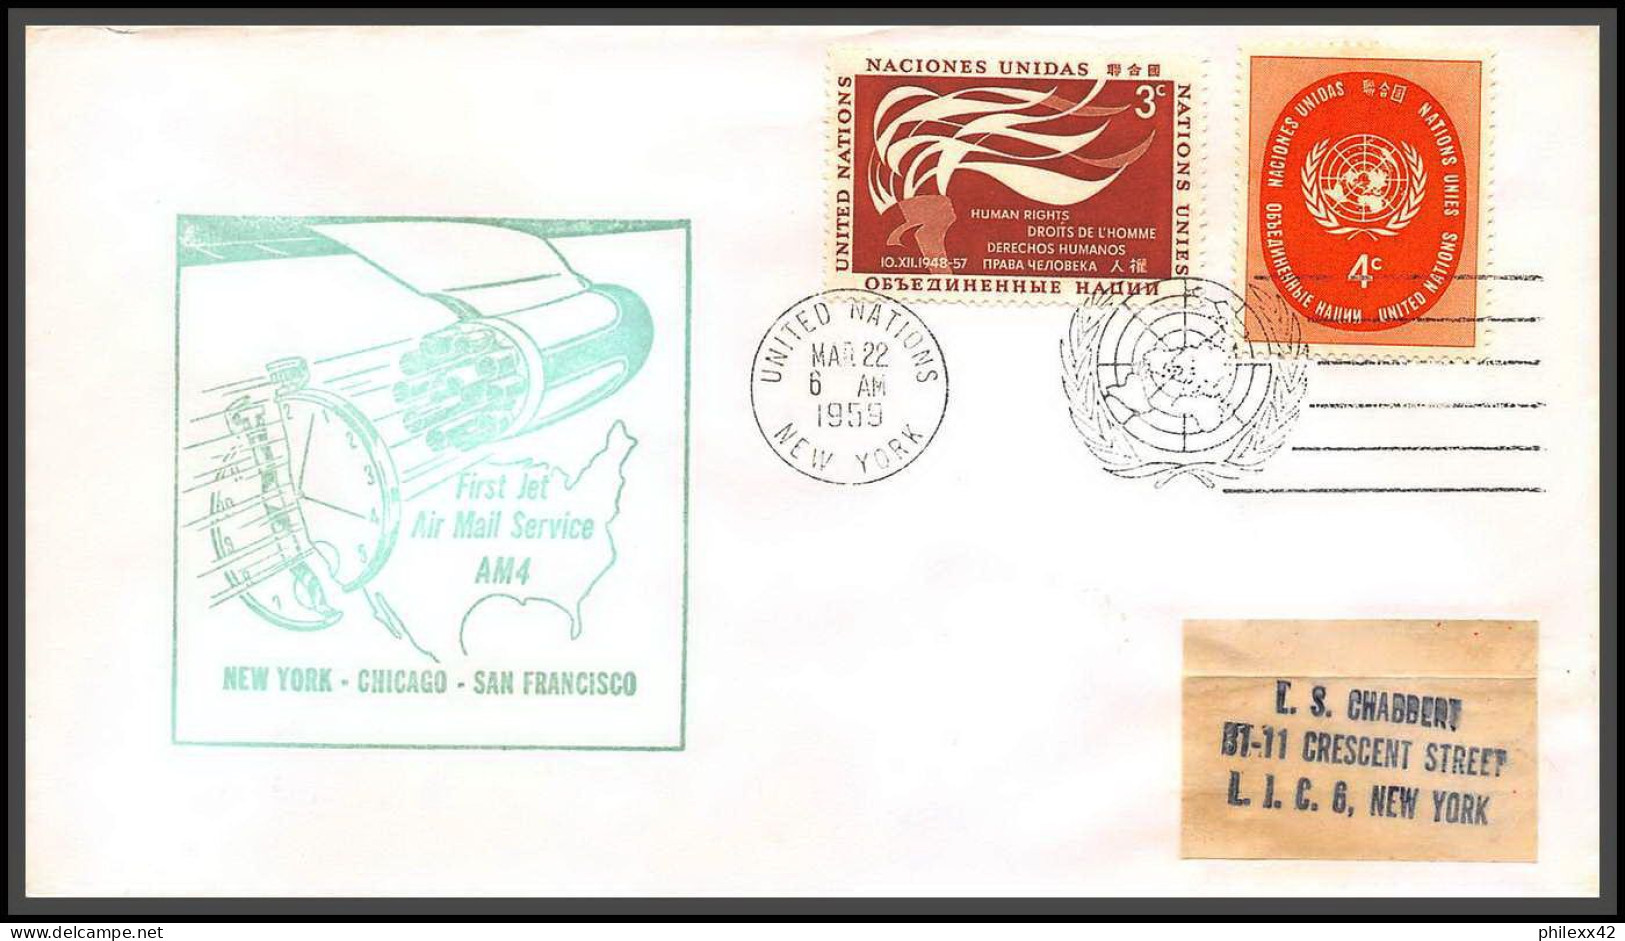 12641 Am 4 22/3/1959 Premier Vol First Flight Lettre Airmail Cover Usa New York Chicago San Francisco United Nations - Aviones